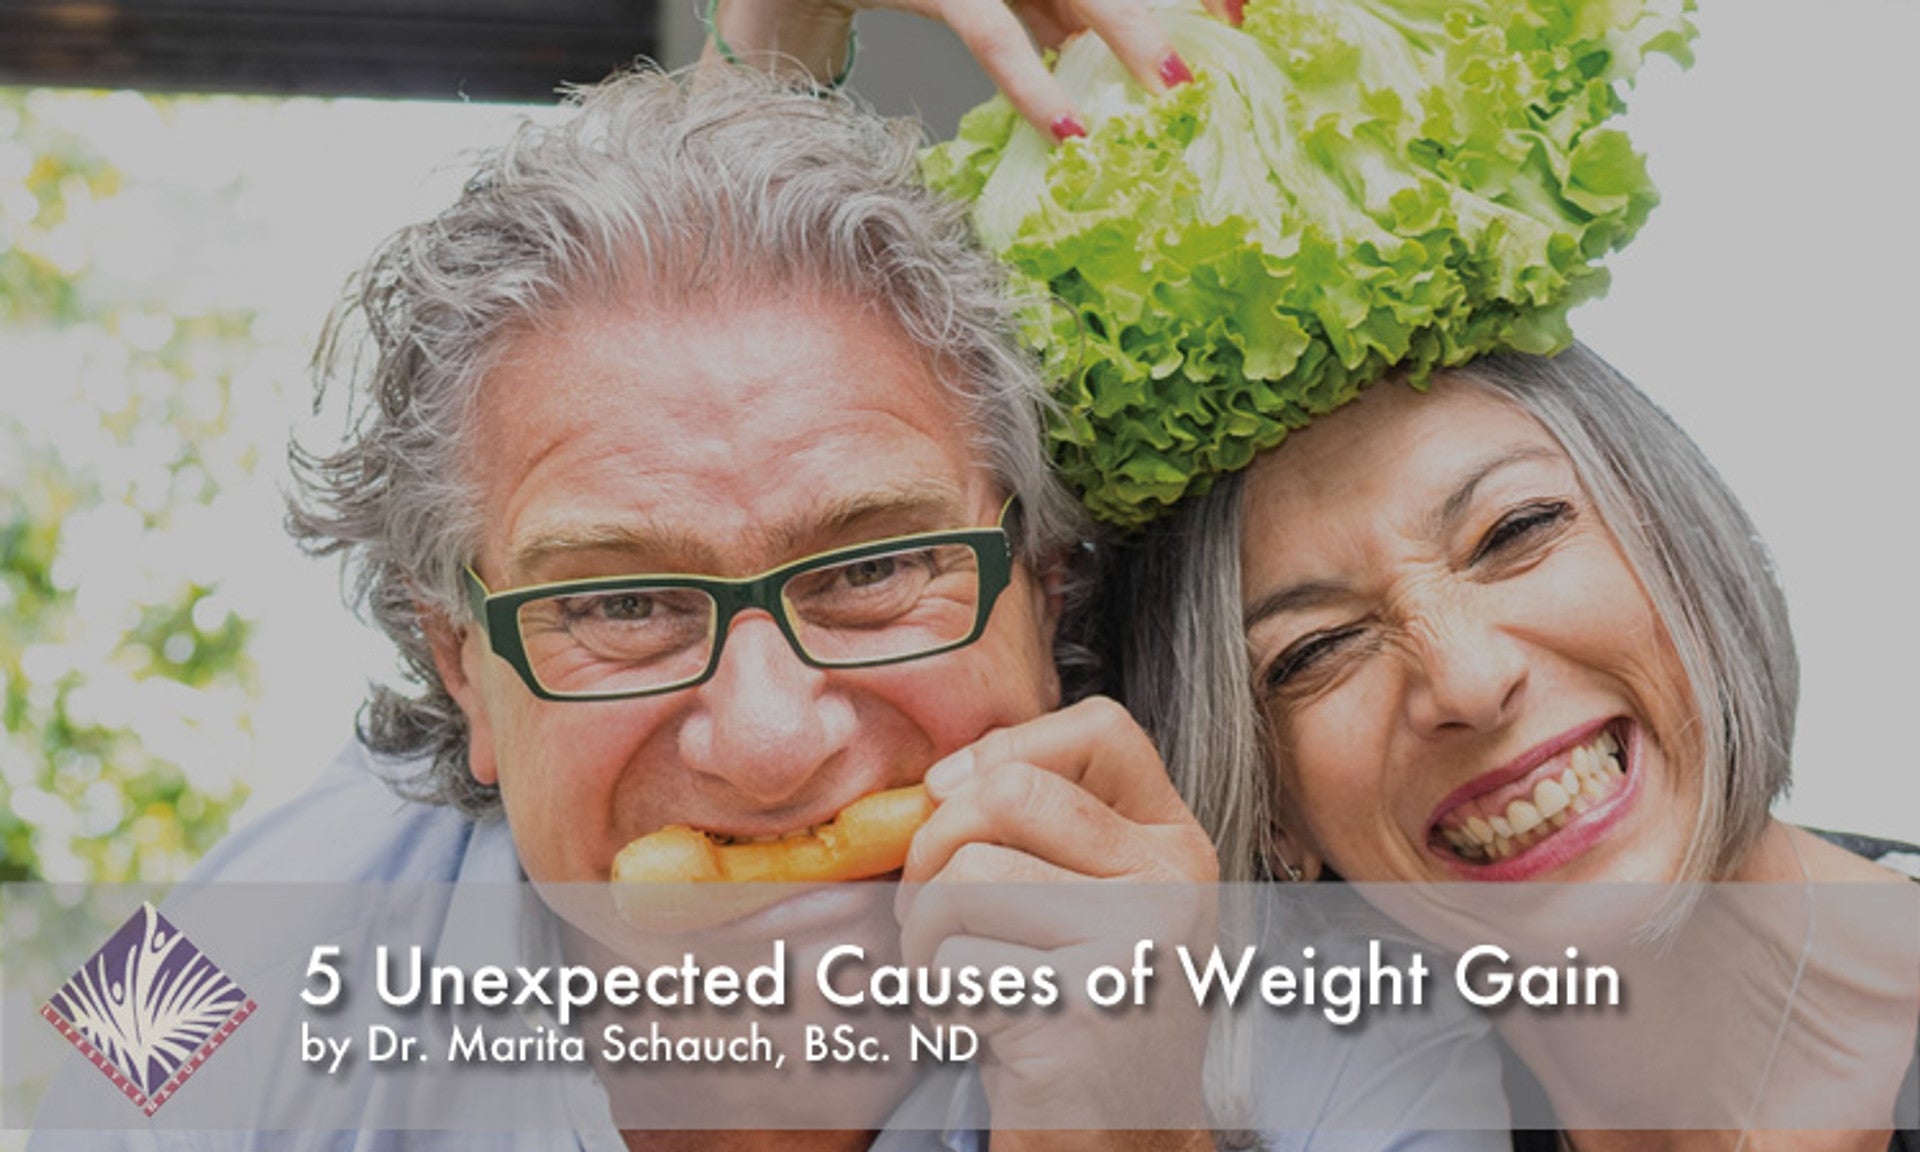 5 Unexpected Causes of Weight Gain